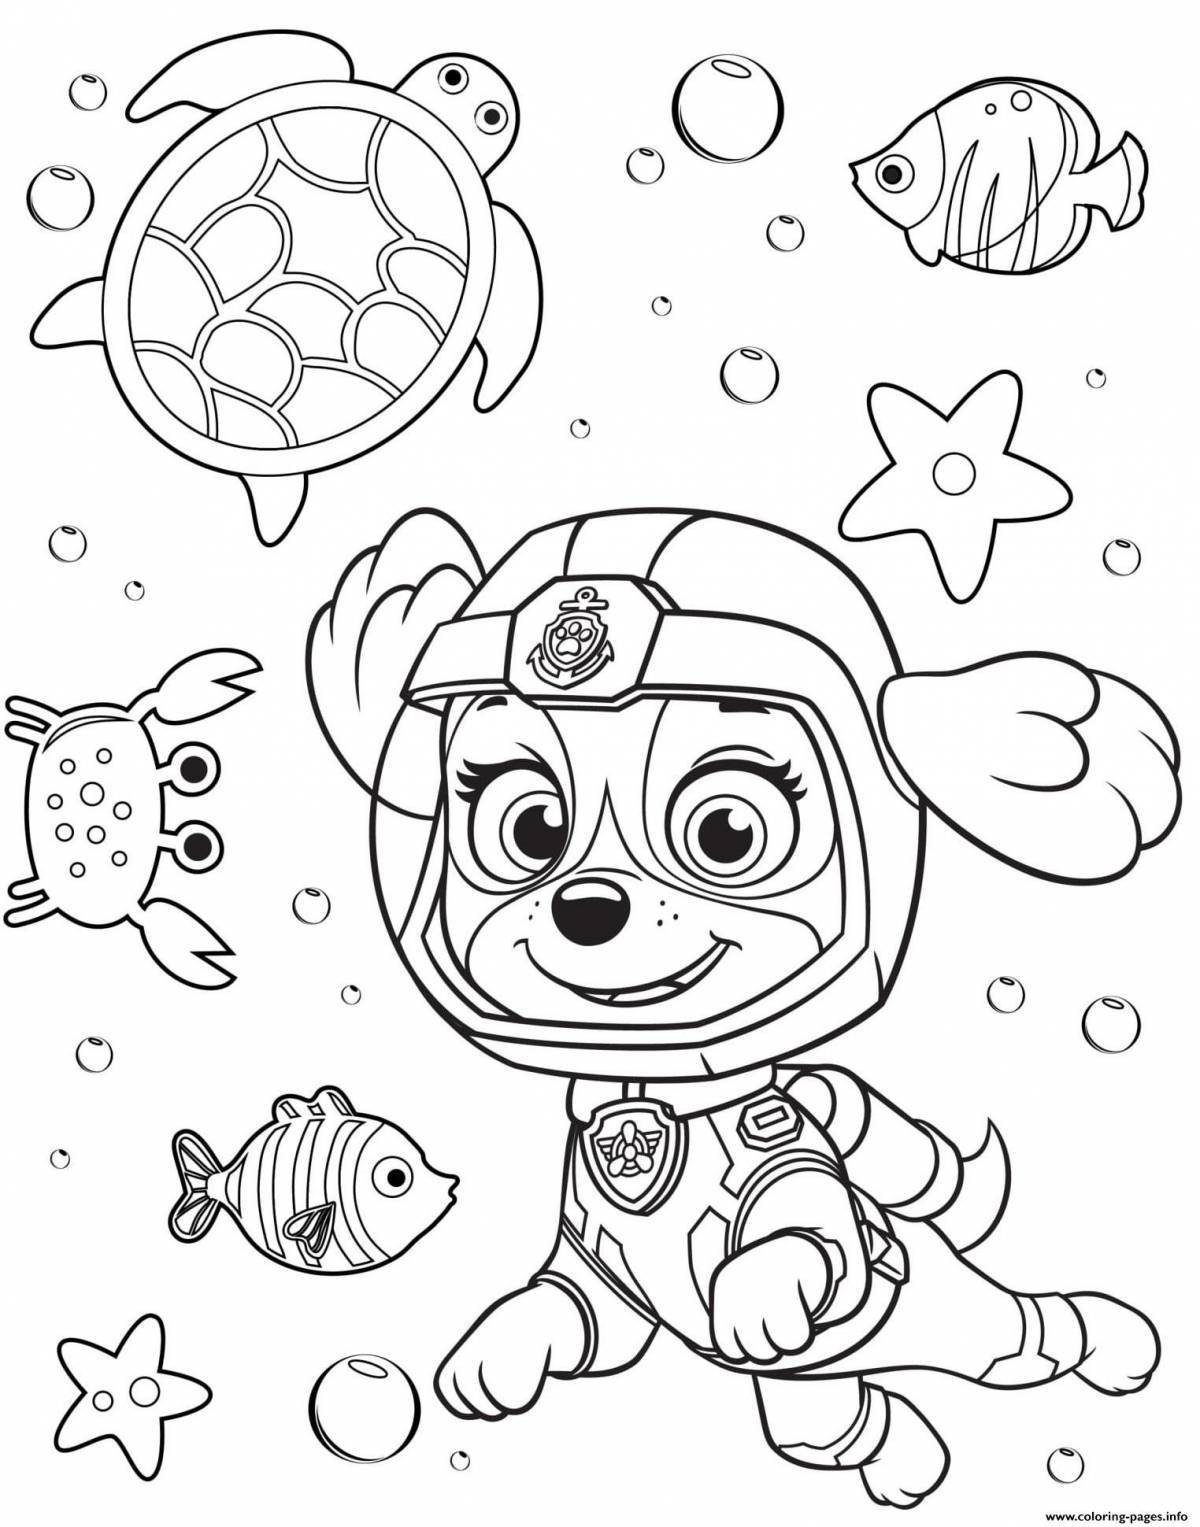 Paw patrol pictures #4